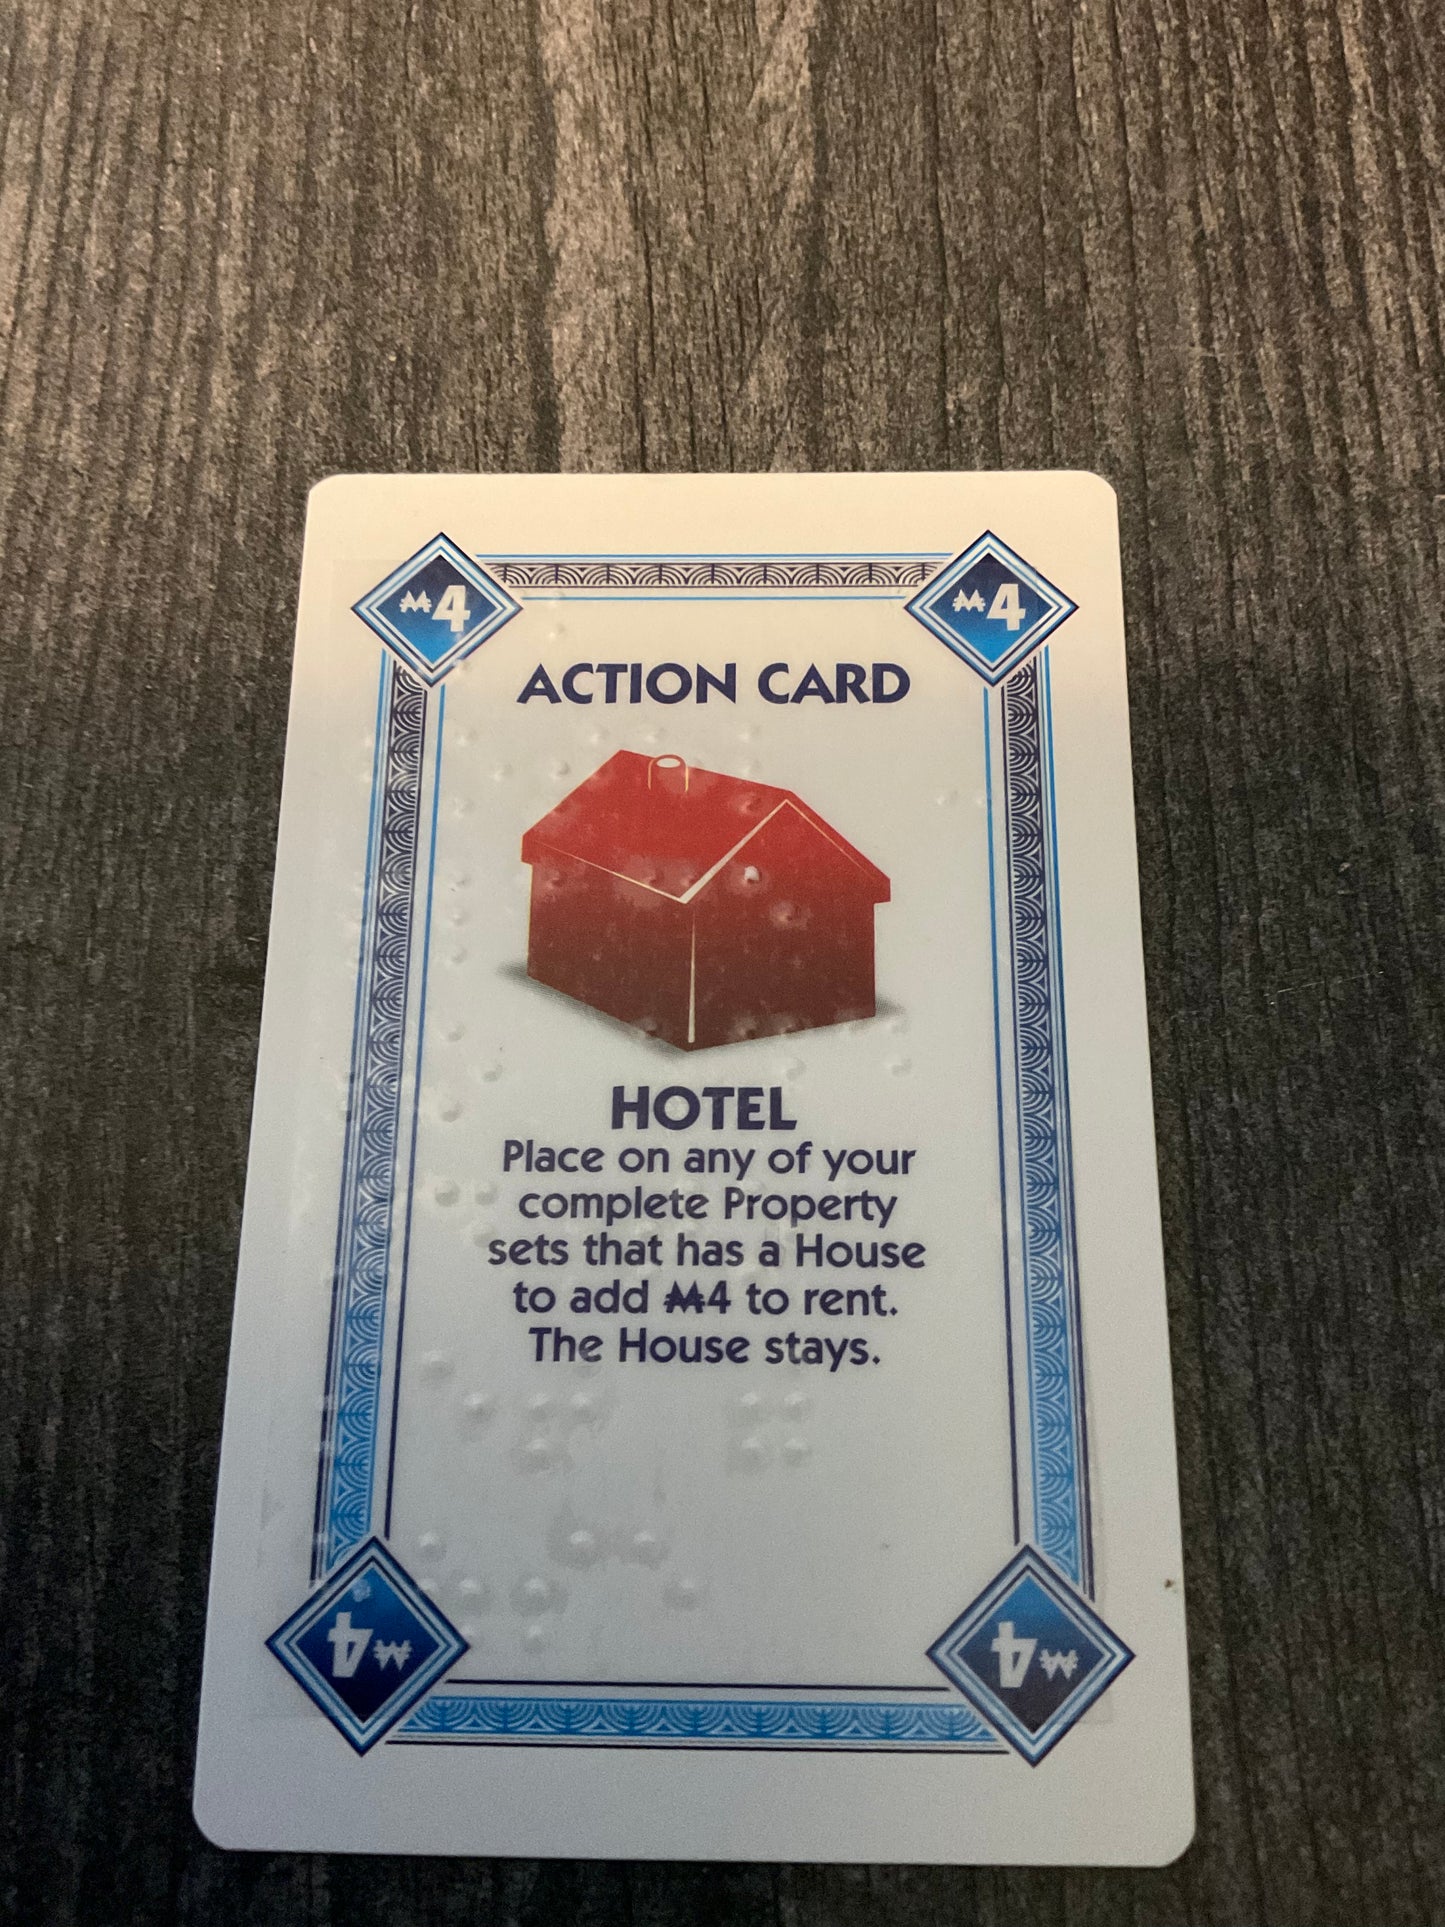 Image of a hotel card